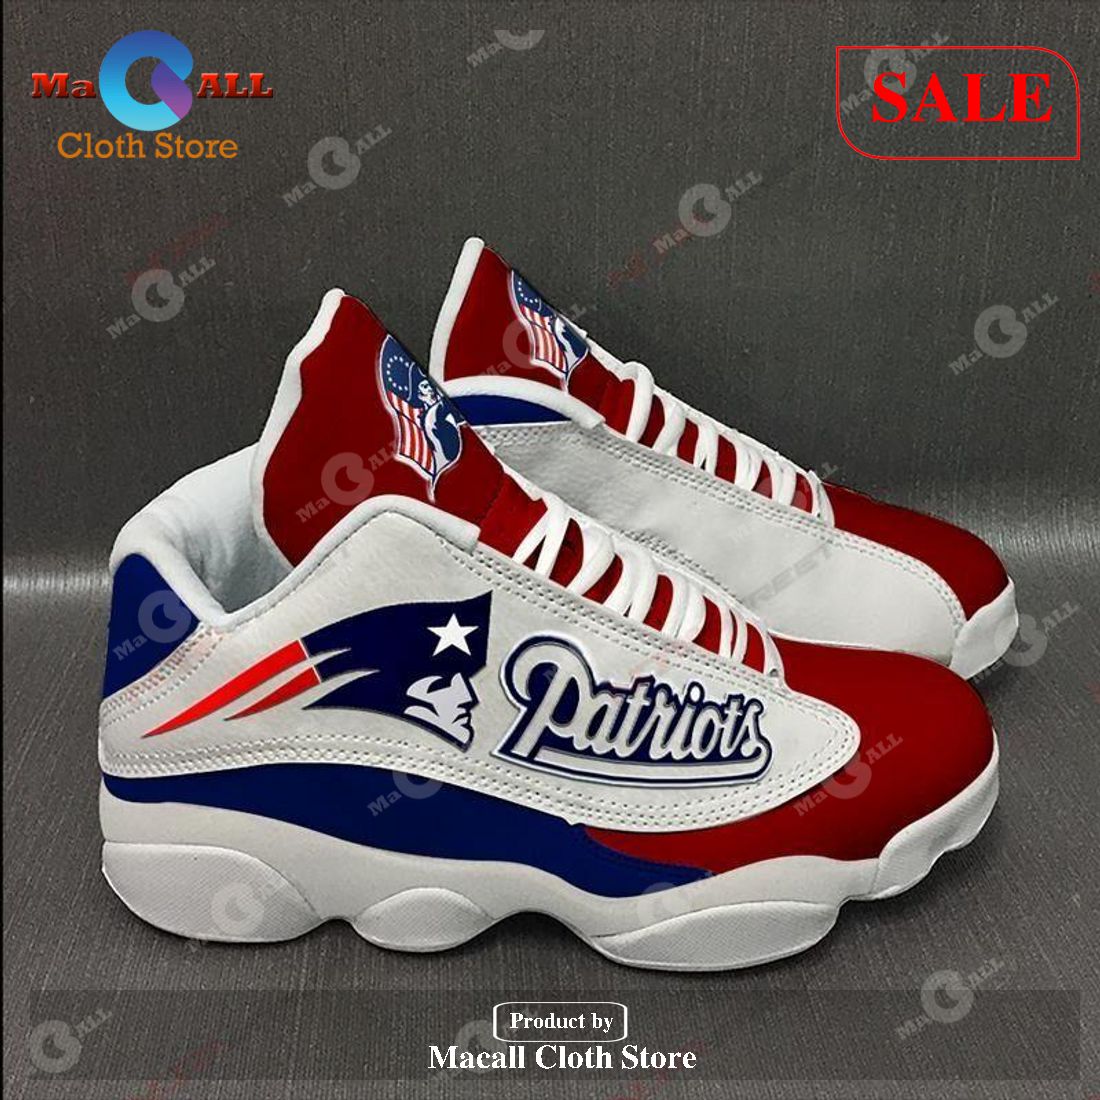 SALE] New England Patriots Air Jordan 13 Sport Shoes Full - Macall Cloth Store - for fashionistas